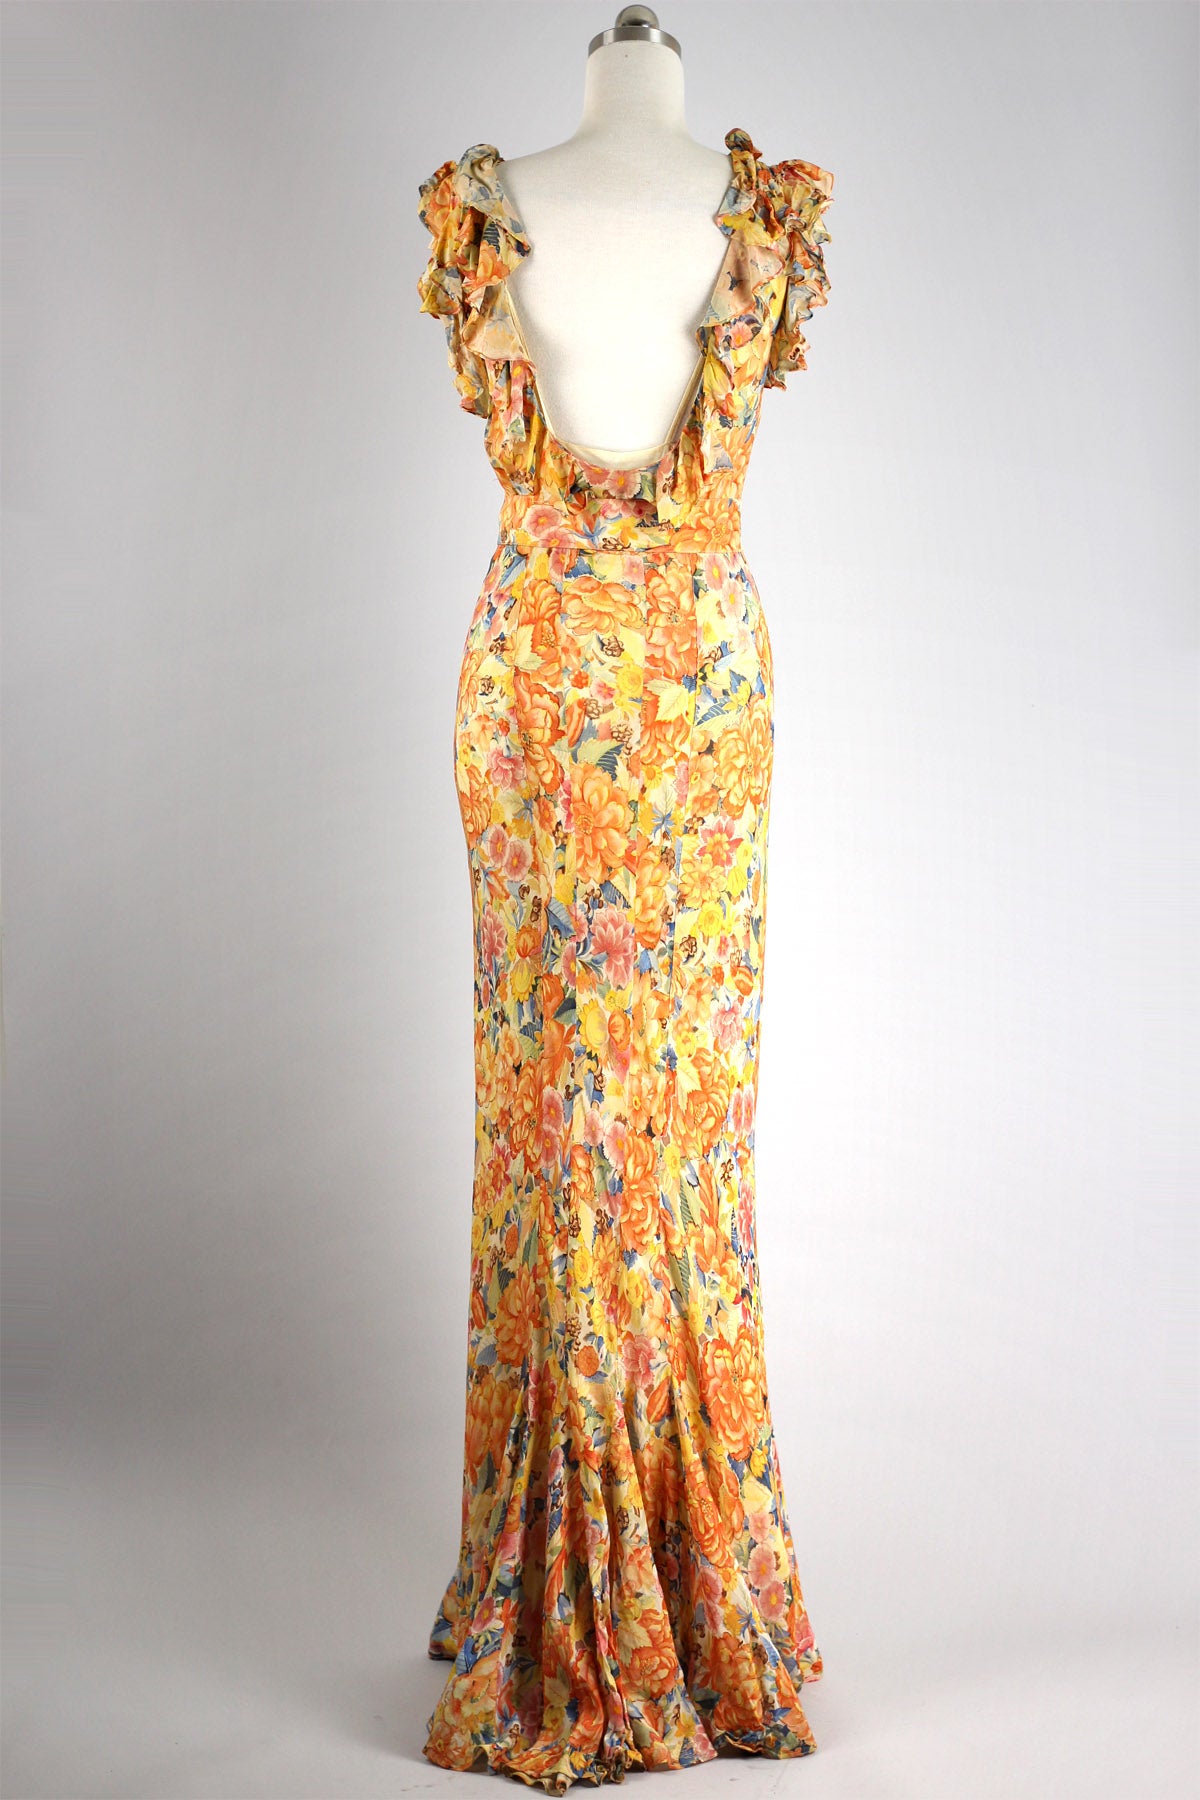 Stunning 1930s Rare Floral Silk Organza Gown with Fishtail Hem